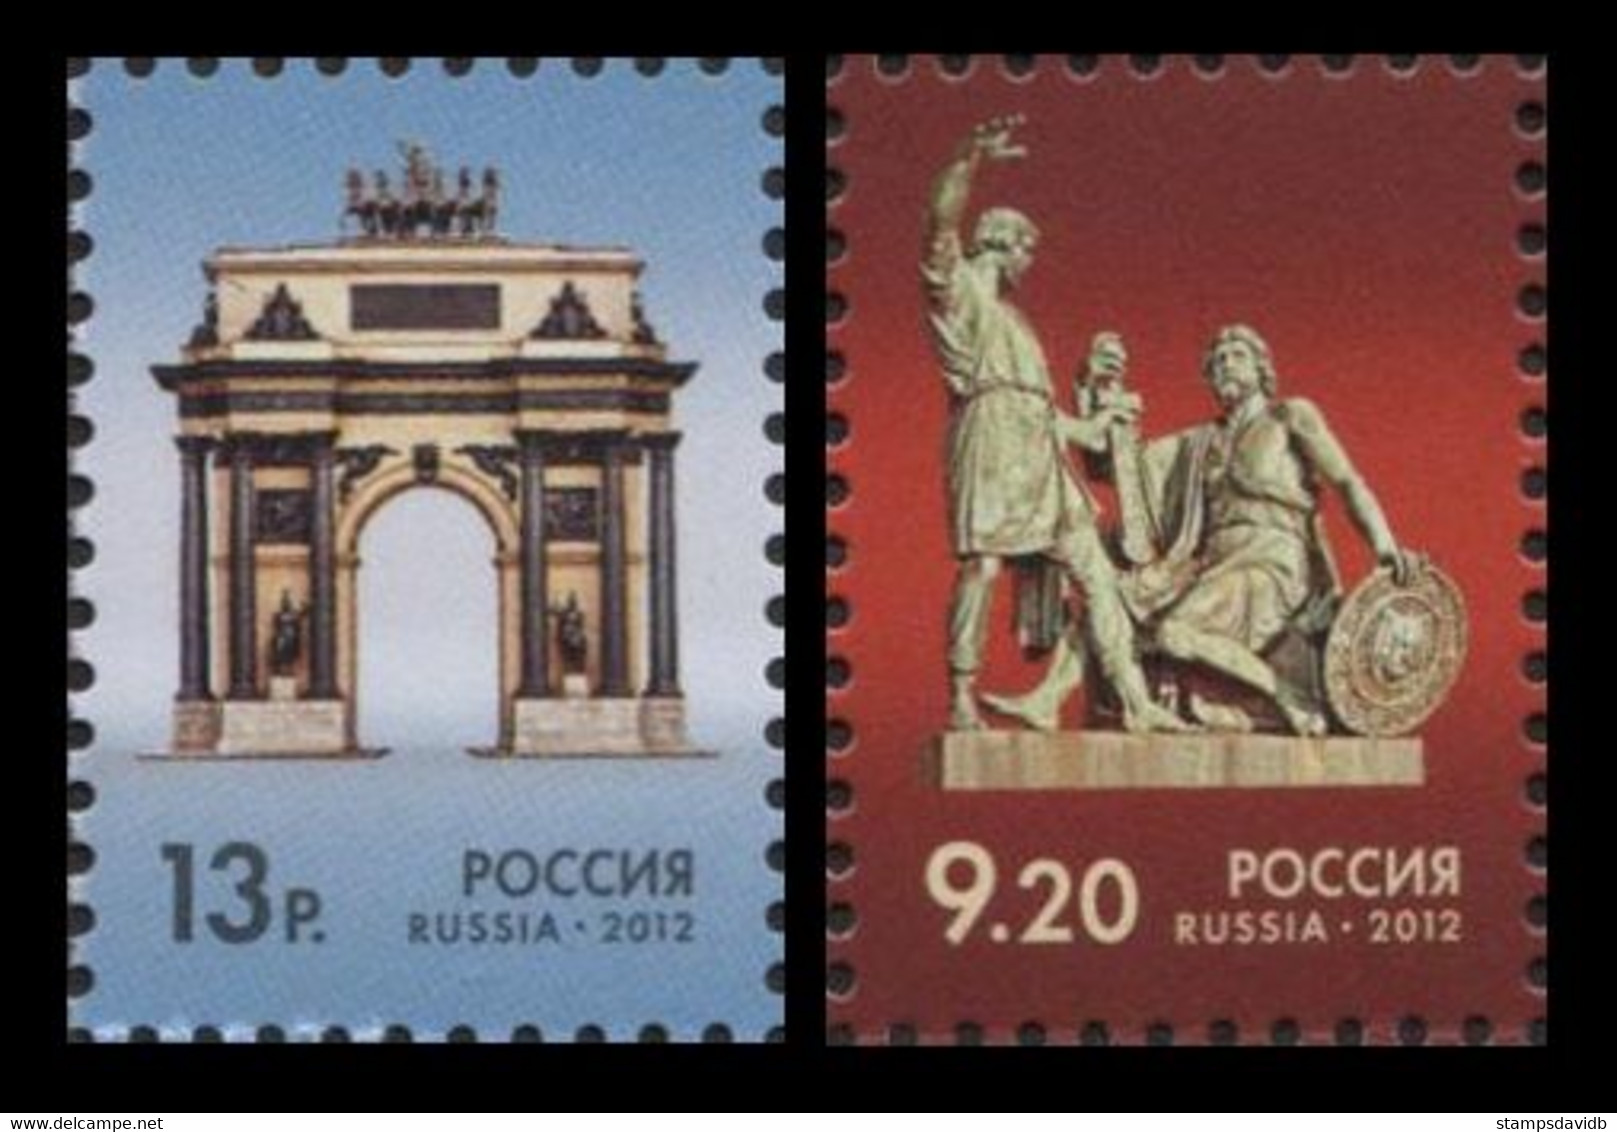 2012 Russia 1829-1830 Triumphal Gates/Monument To K. Minin And D. Pozharsky In Moscow 2,50 € - Unused Stamps